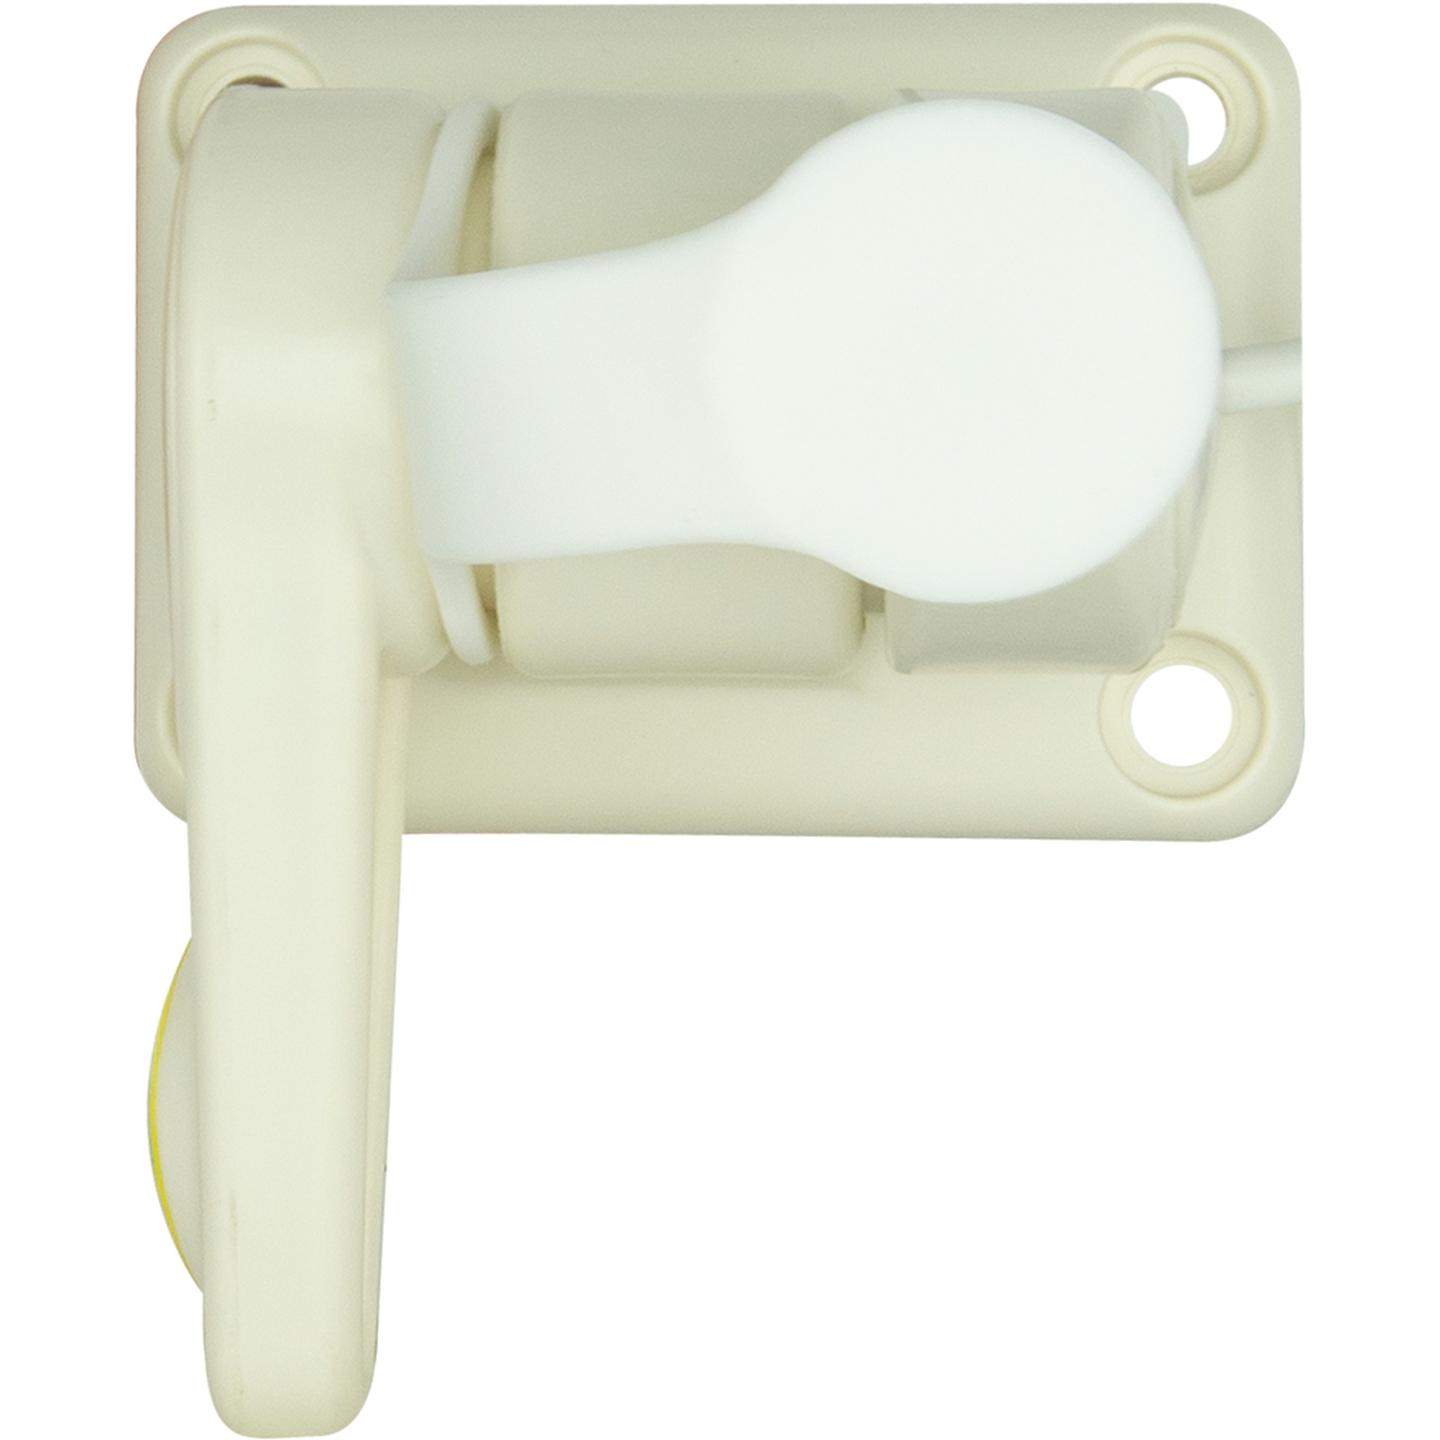 Rectangular Single Swivel Antenna Base with lead - Suit AW36xx whips - White